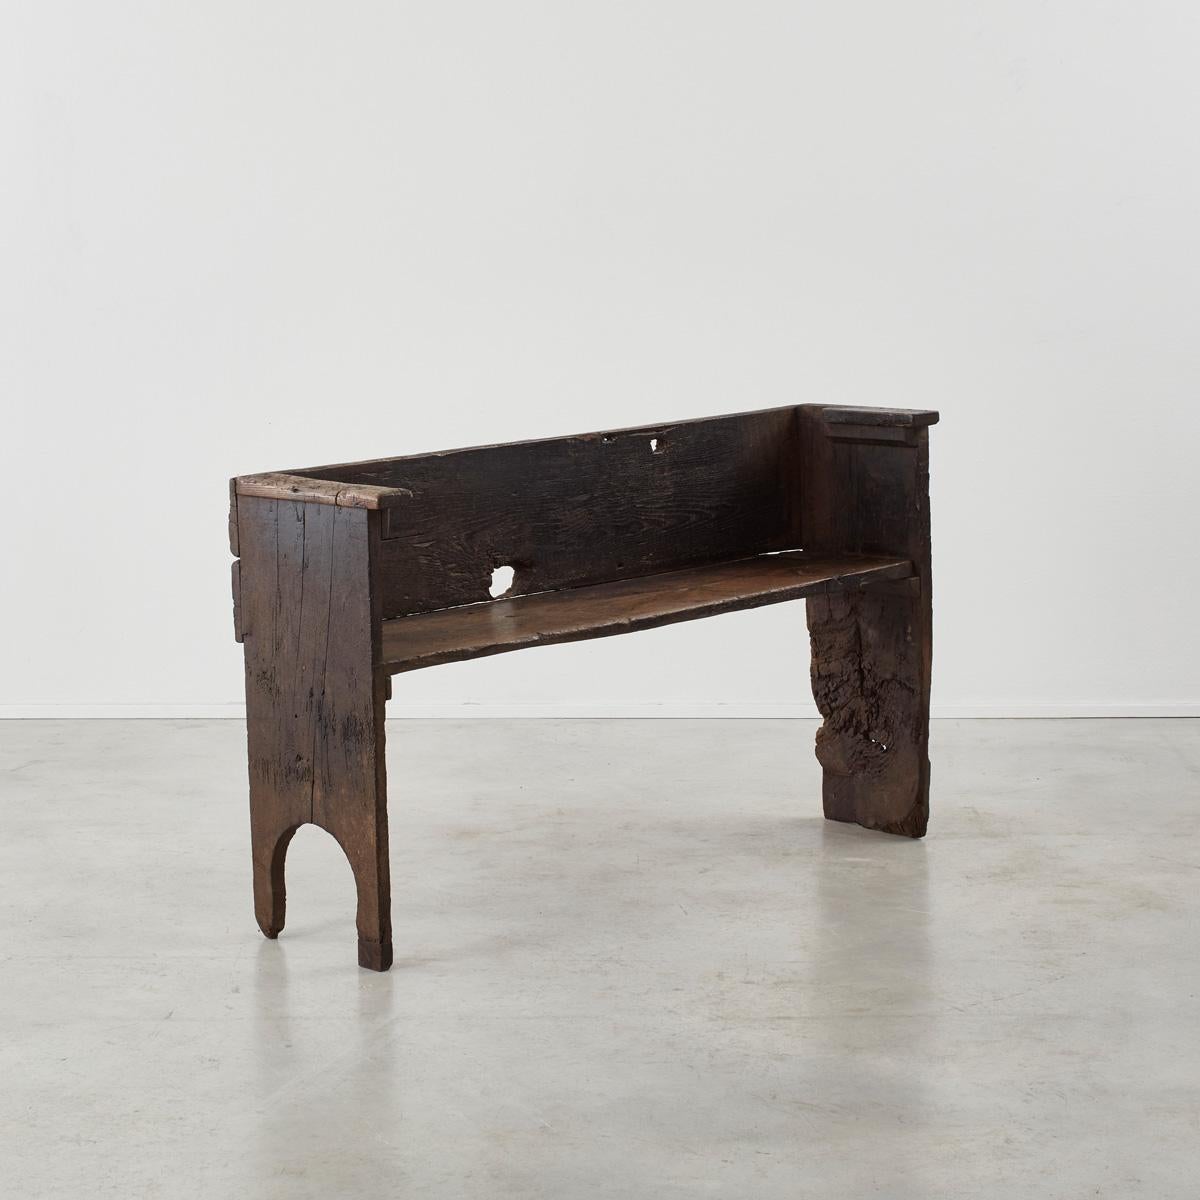 A rare late 17th Century bench from Galicia with nearly 300 years of patination, creating a beautiful and inimitable texture. The construction is rudimentary but incredibly solid, and it expresses a strangely contemporary form.

Constructed circa